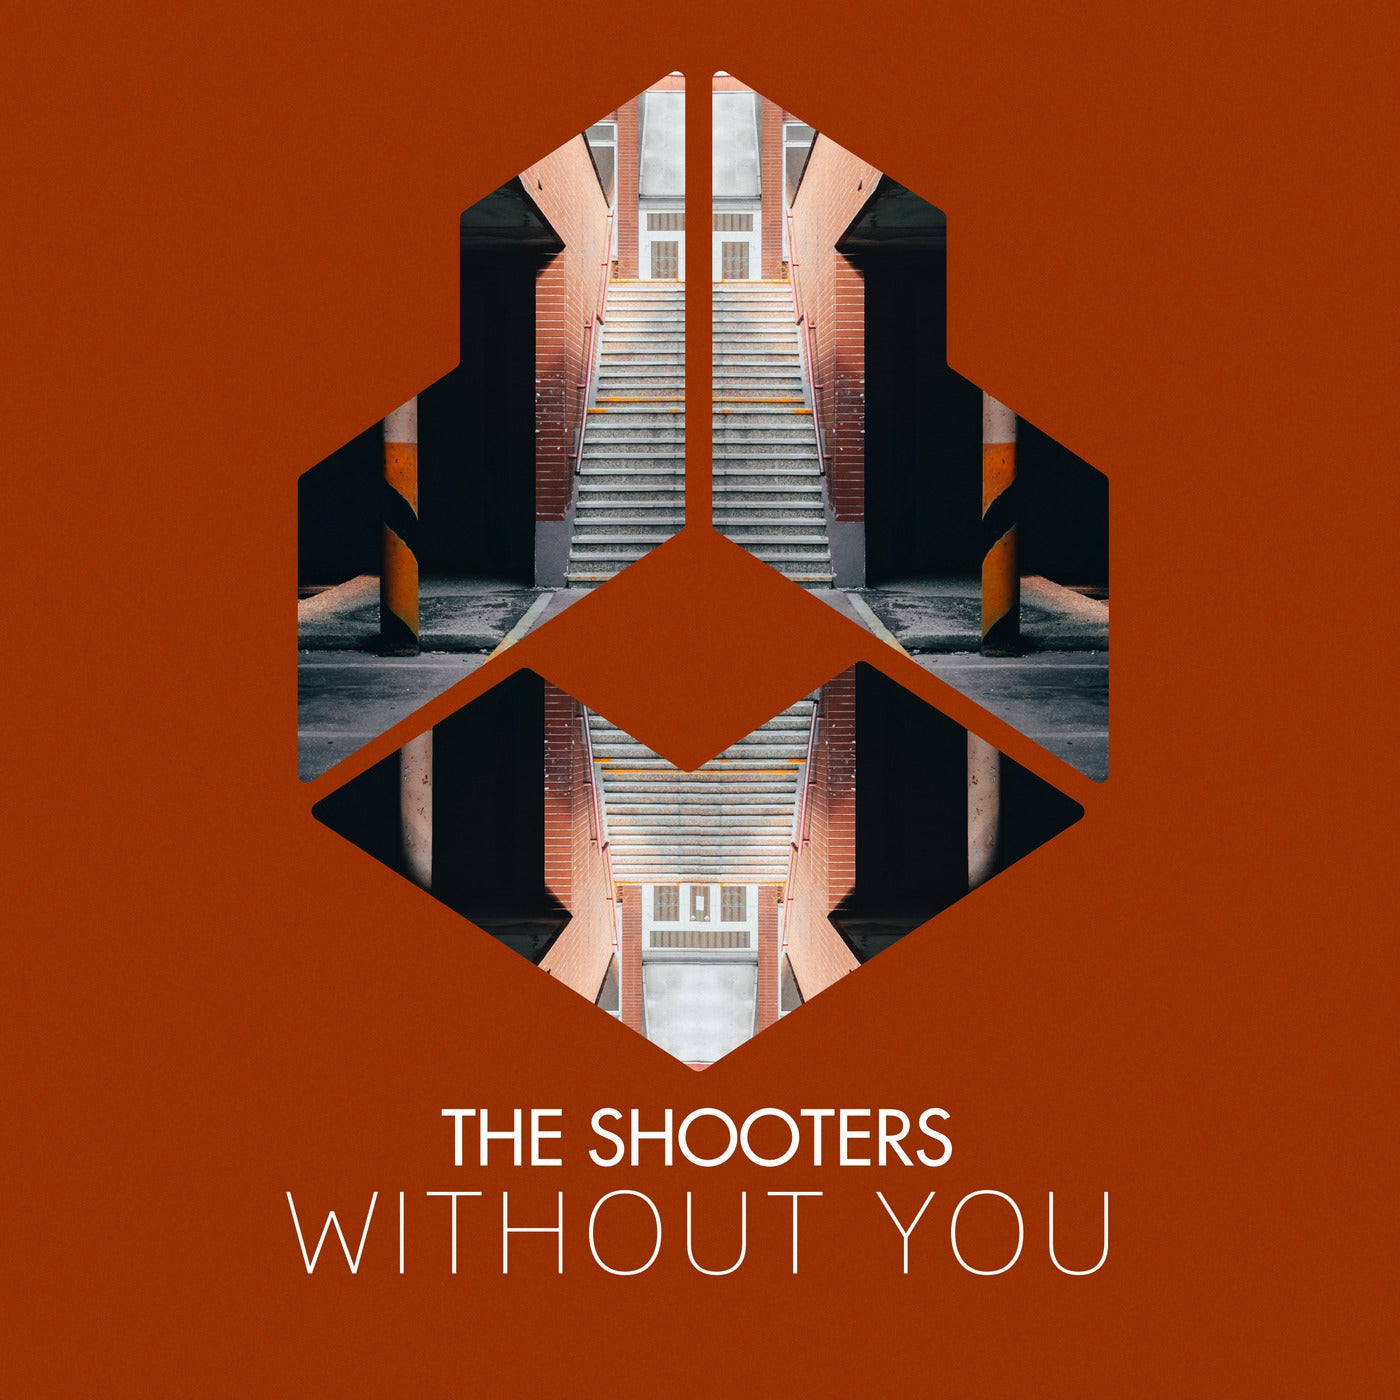 Without You - Radio Edit